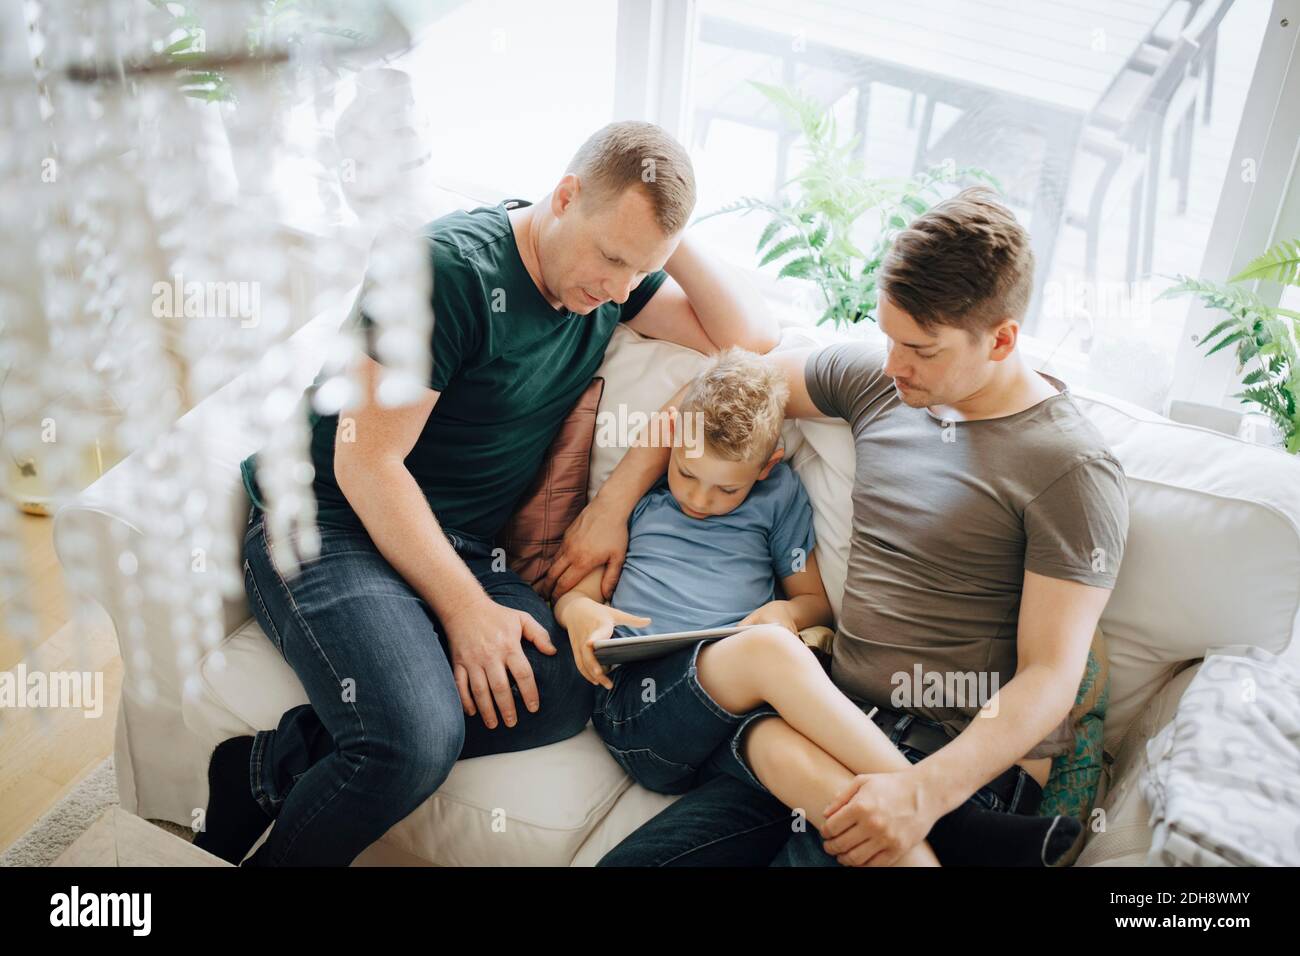 High angle view of homosexual fathers sitting while son using digital tablet at home Stock Photo